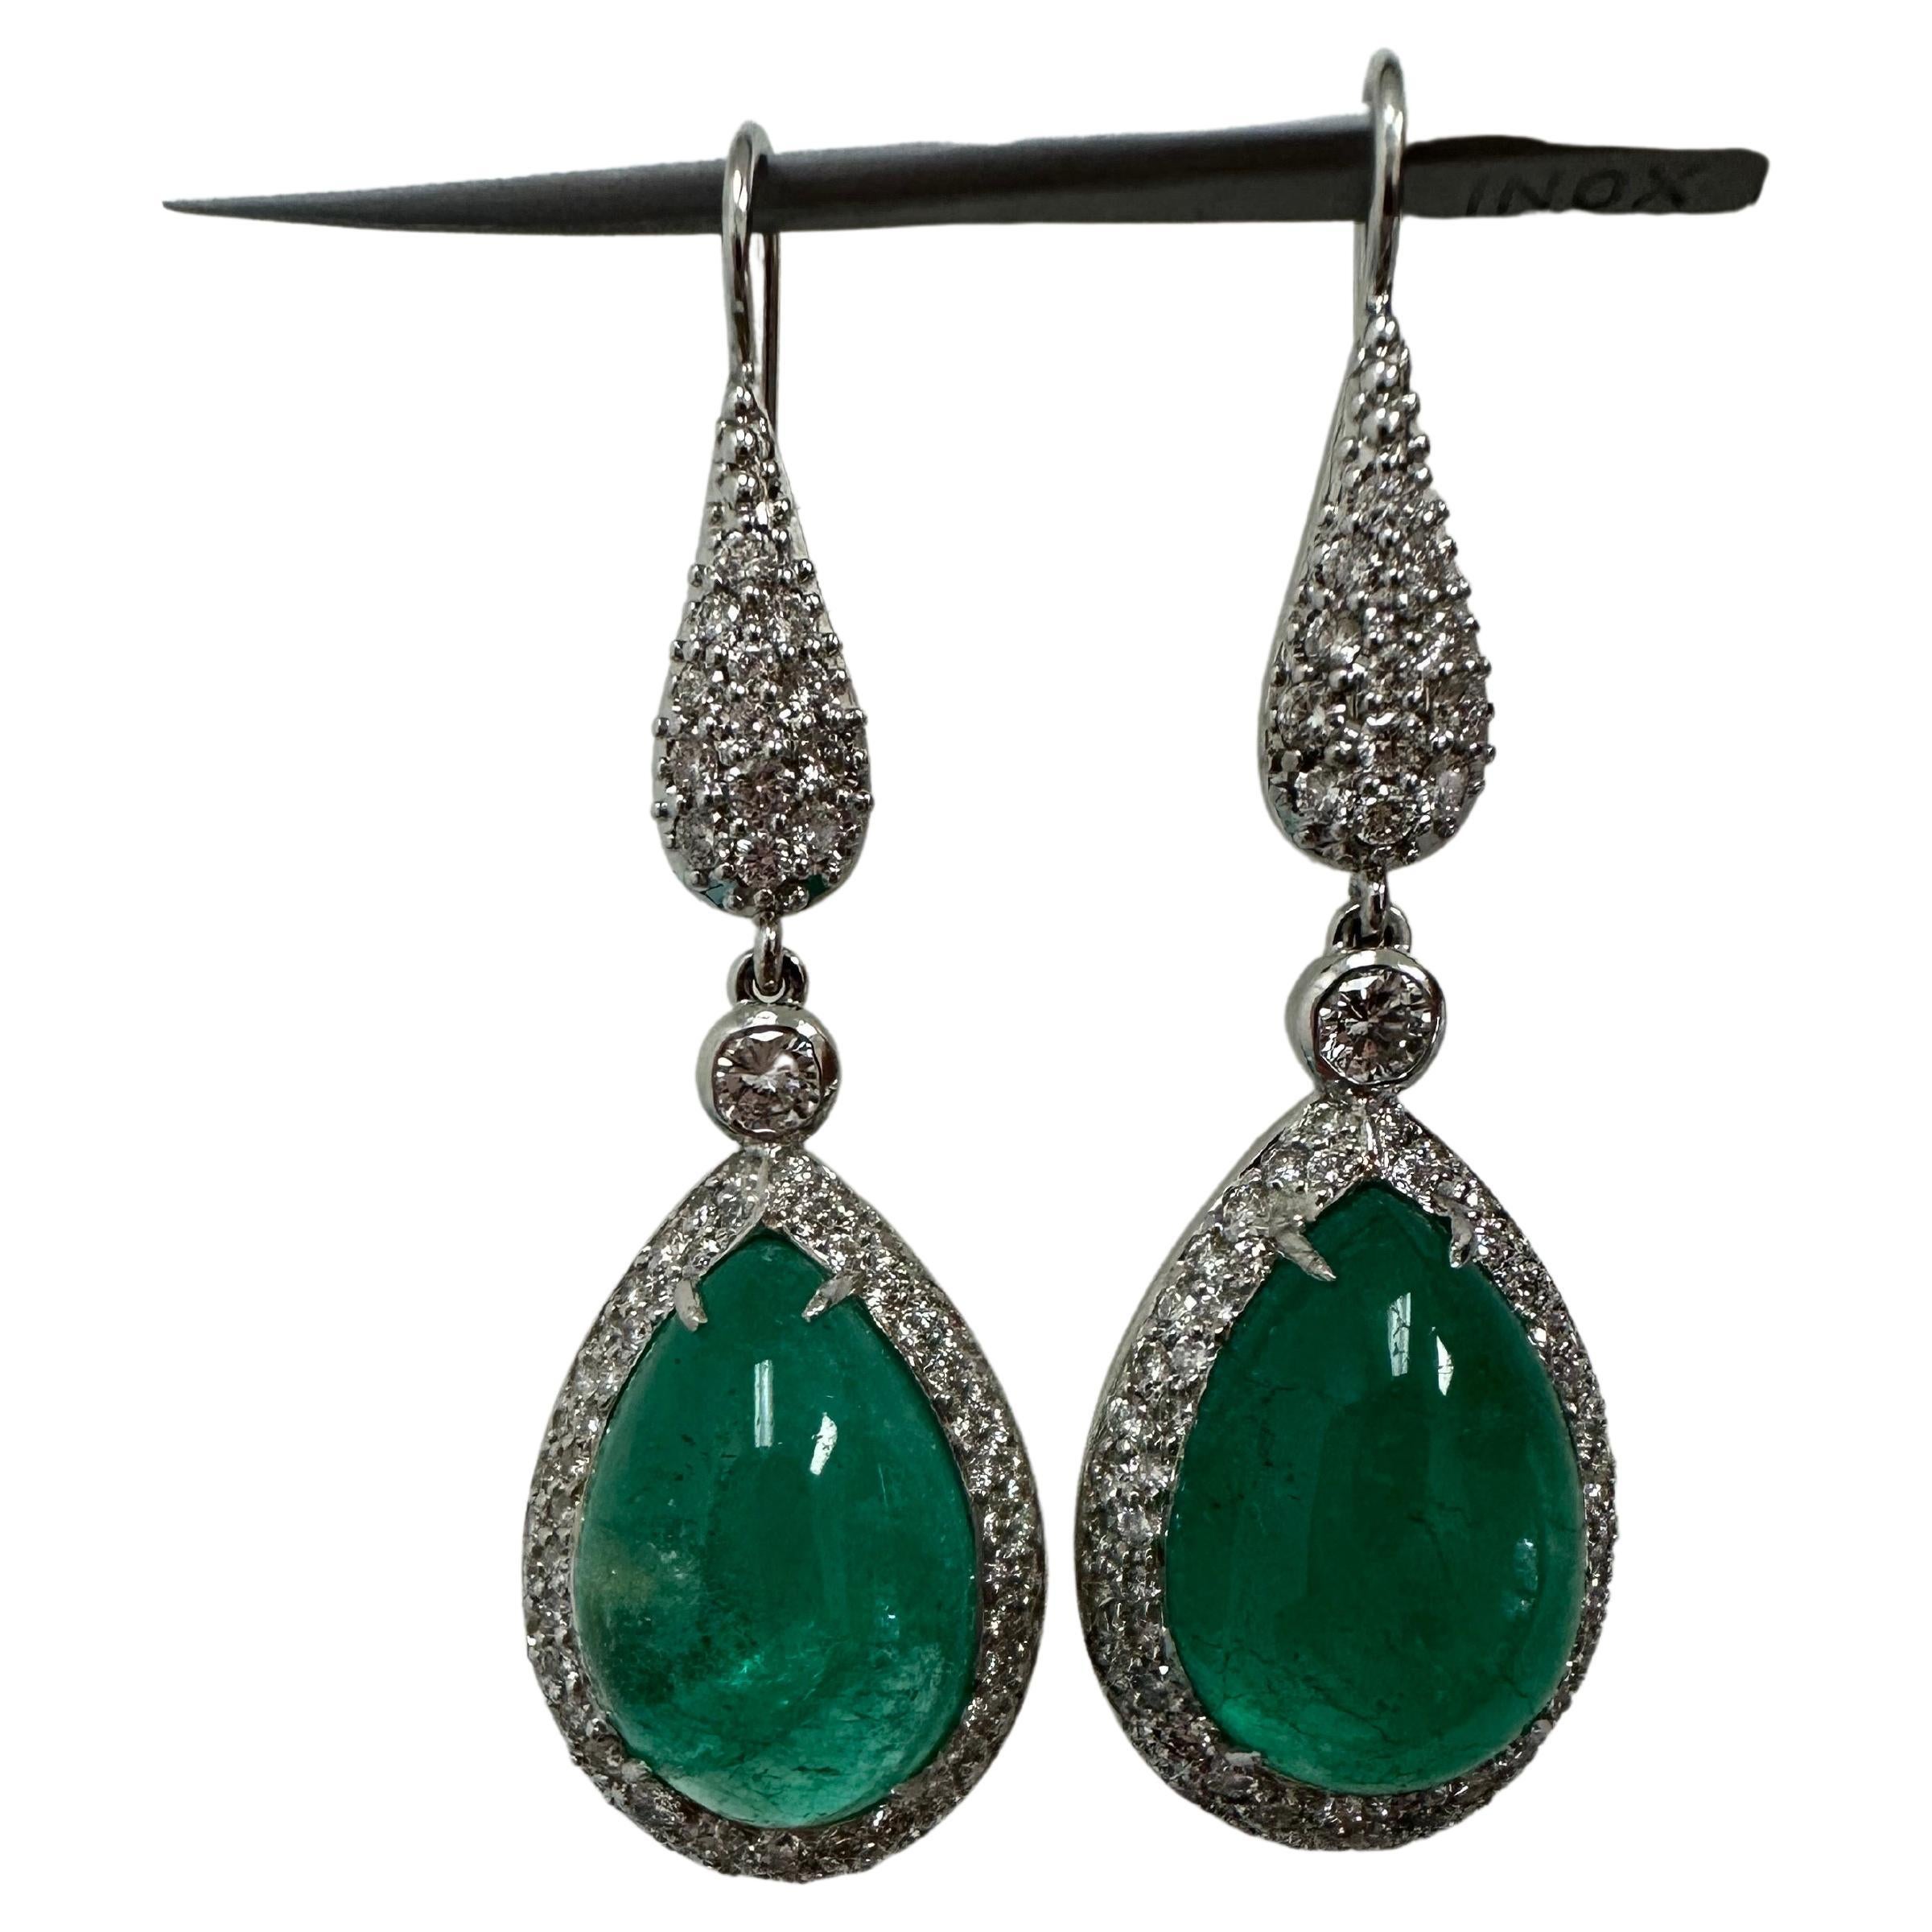 Important emerald and diamond earrings in 18KT gold. Exquisite craftsmanship and rare matching emeralds 100% natural and unenhanced. 
The earrings are long and luxurious made with a comfortable fish hook long for extra security and comfort, the